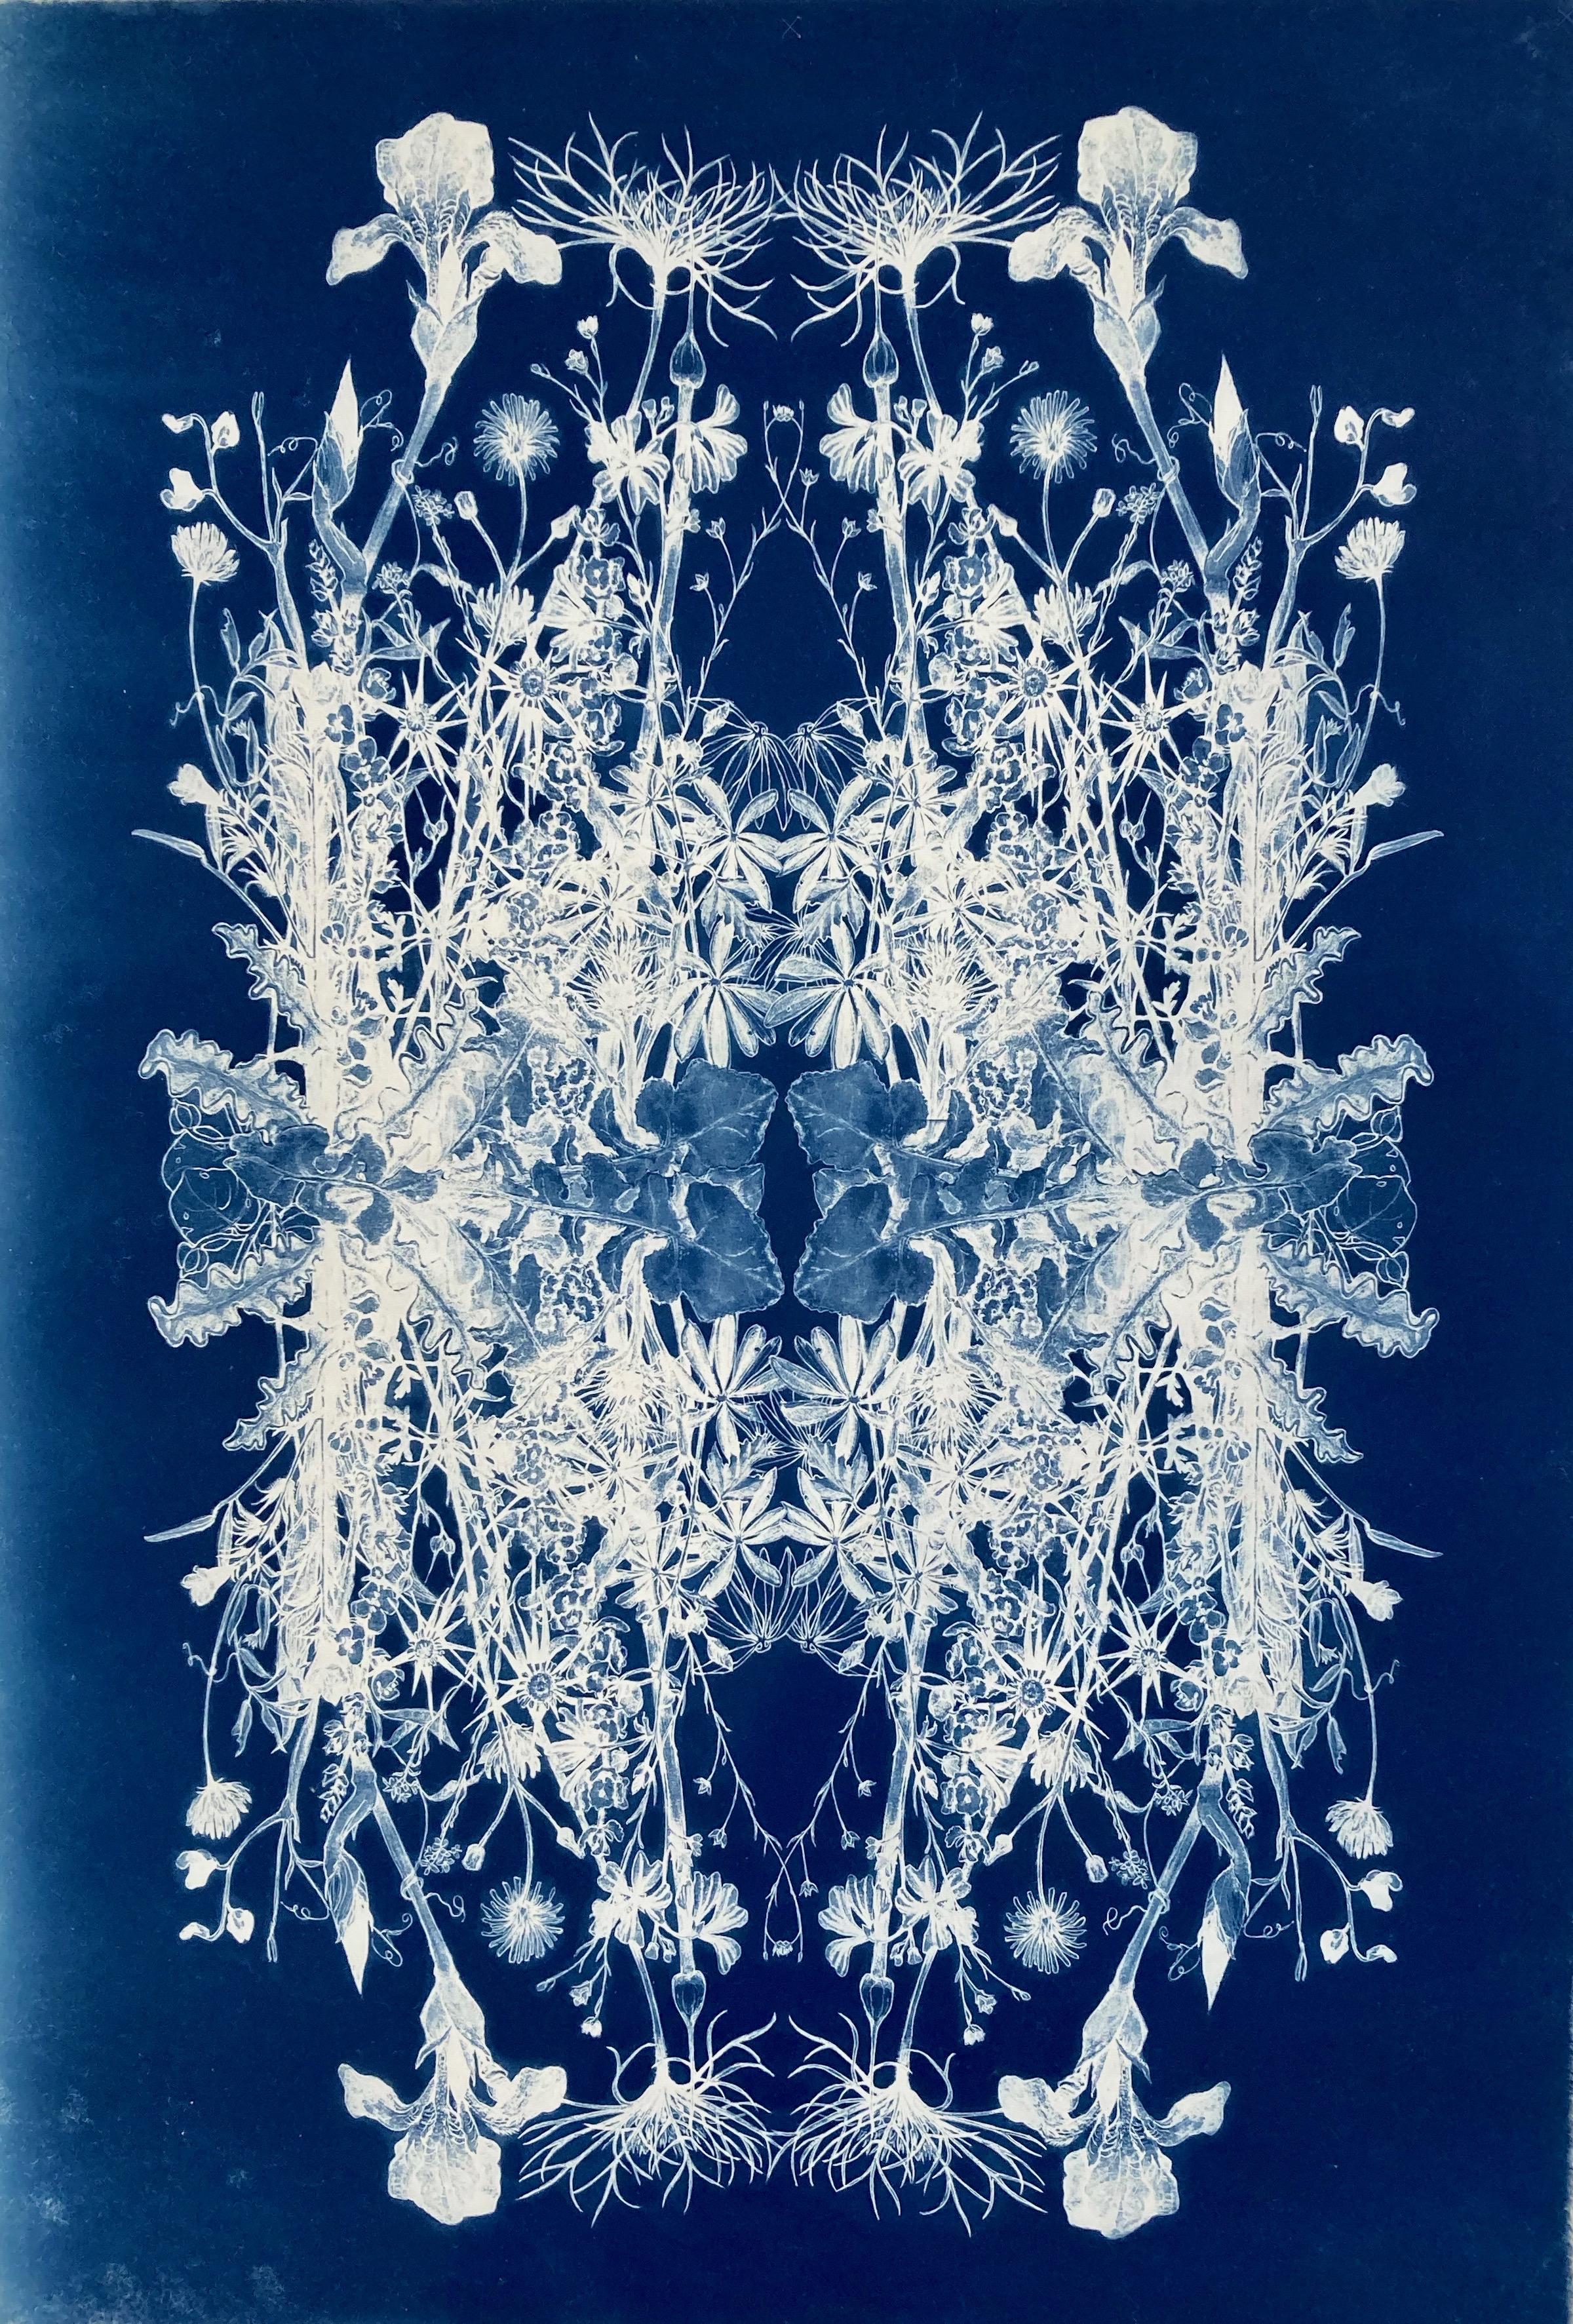 Judith Allen-Efstathiou Still-Life Photograph - 'Botanical Rhapsody'   Realistic/Abstract Floral Pattern Photograph Blue/White  